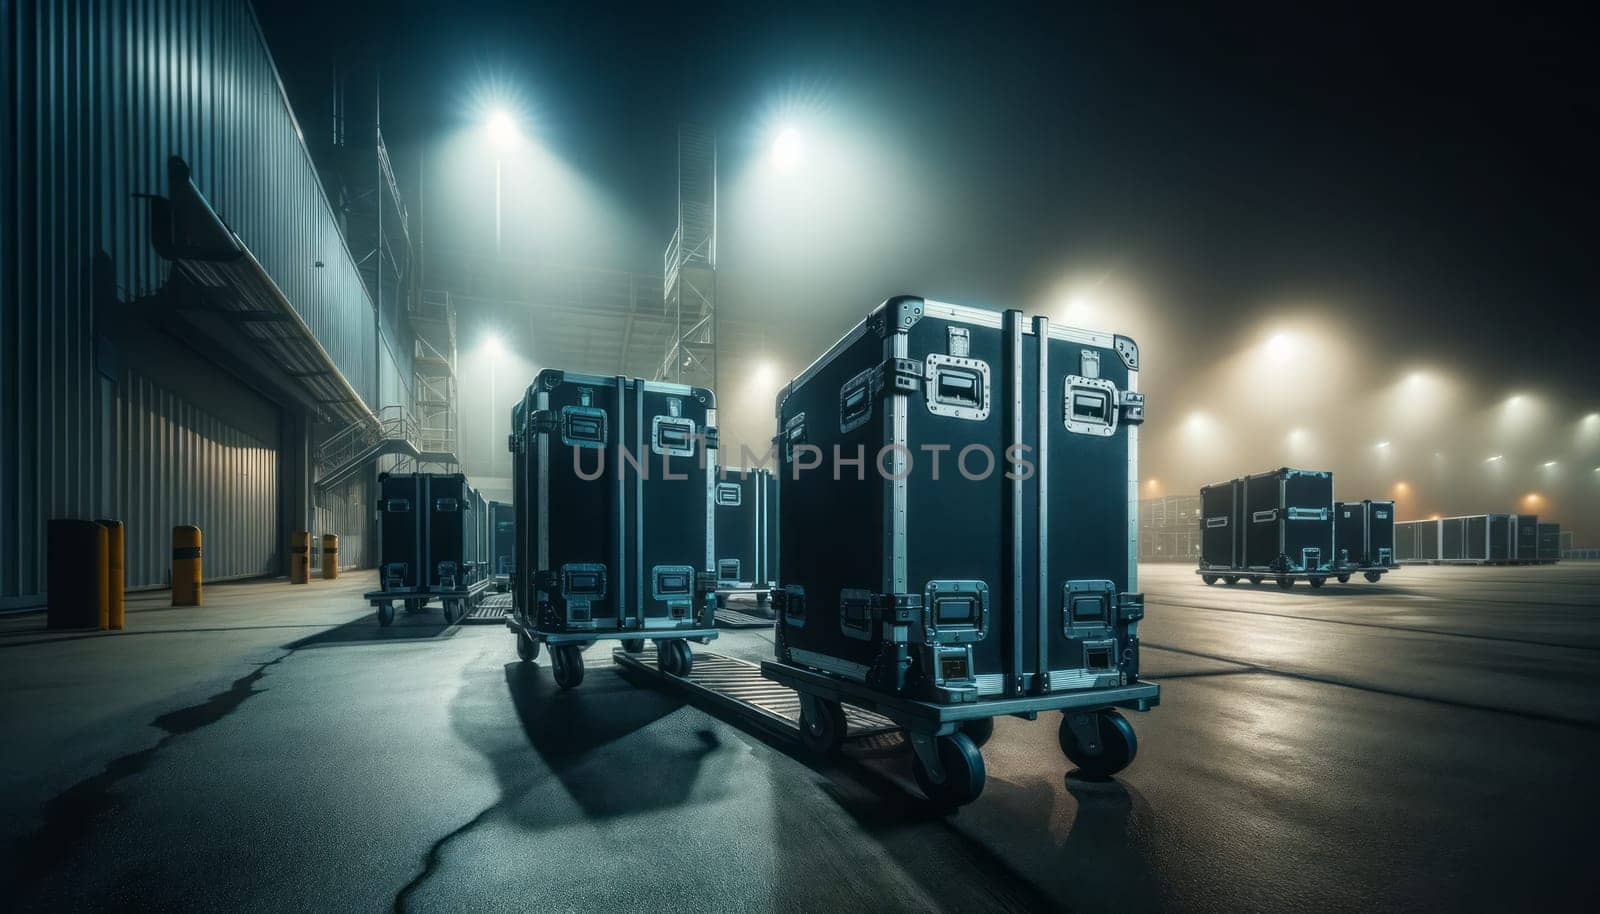 A wide-angle night photograph of a logistic area, featuring large equipment cases on dollies. These cases are black with metal trim, rugged, and heavy-duty, indicating they are ready for loading or just offloaded. The scene is under the harsh artificial lighting from street lamps and building lights, creating deep shadows and a moody atmosphere. In the background, the faint silhouette of a warehouse or event venue is visible, with soft mist or fog enhancing the nocturnal ambience. The ground is made of concrete, reflecting the lights and emphasizing the industrial feel of the setting.